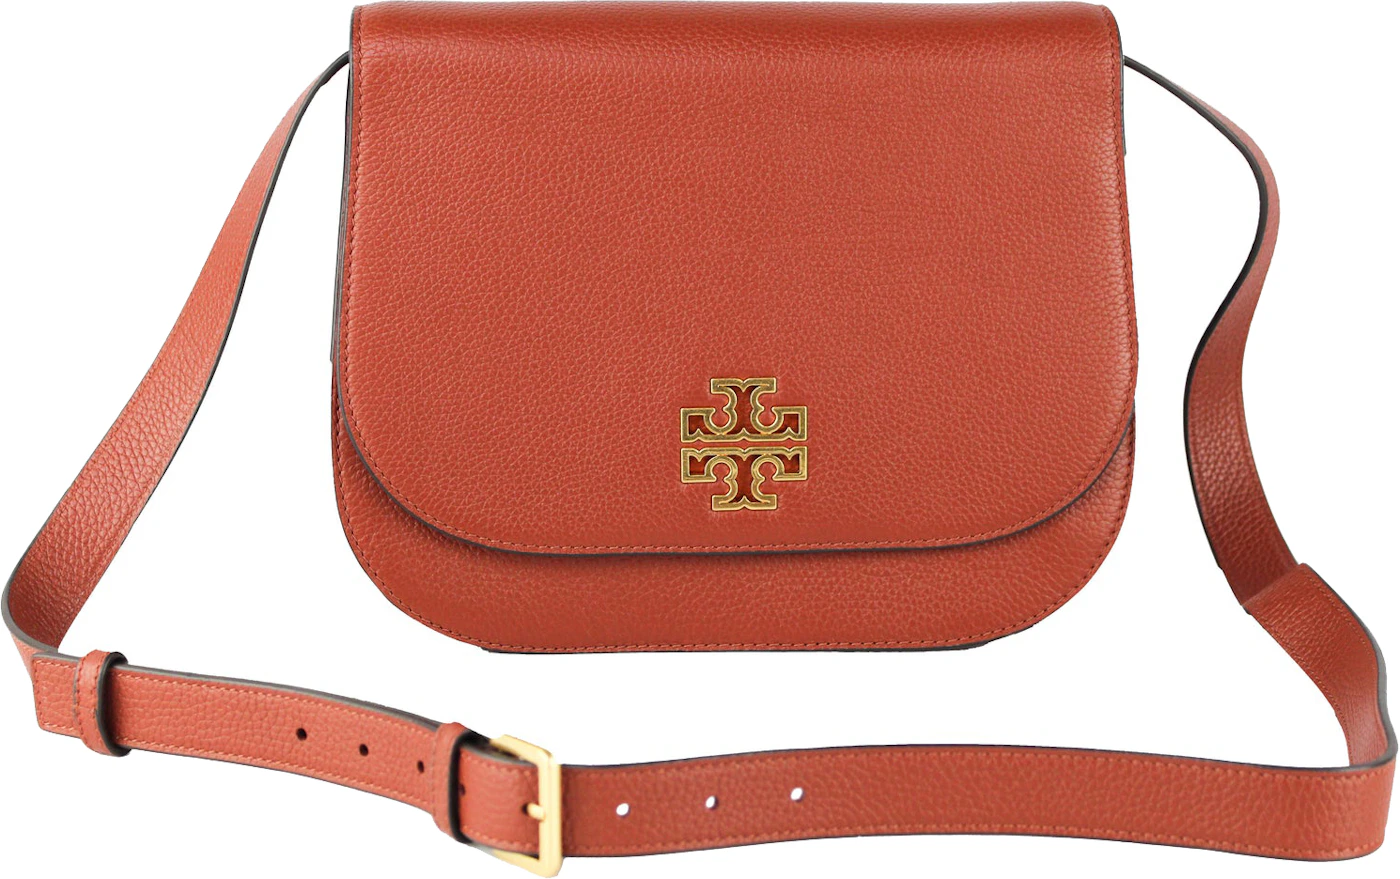 Tory Burch Britten Saddle Bag Medium Britten Sumac in Pebbled Leather with  Gold-tone - US